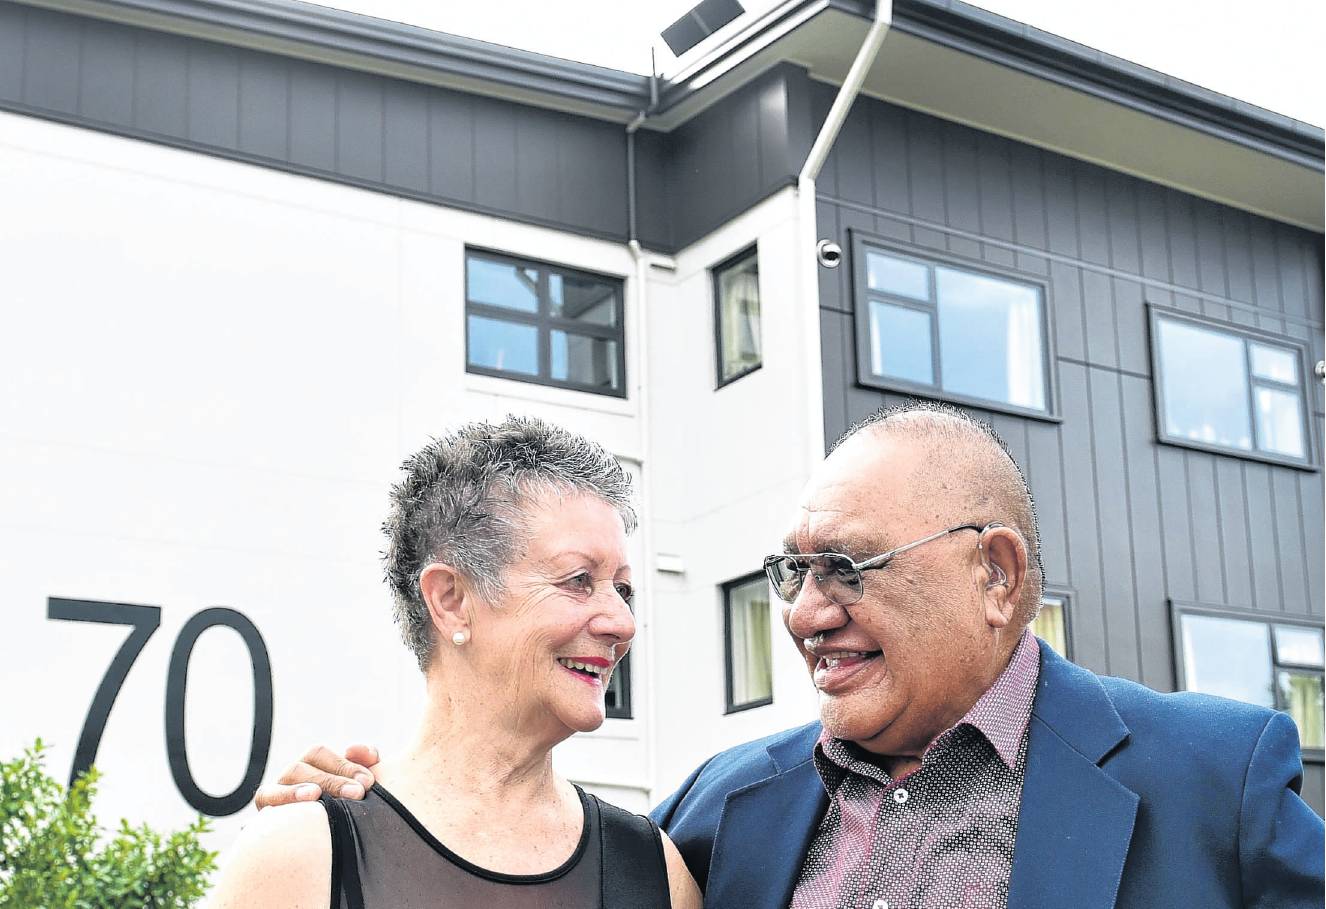 A newly renovated flat in Kainga Ora’s Maitland St community housing was just the ticket for...